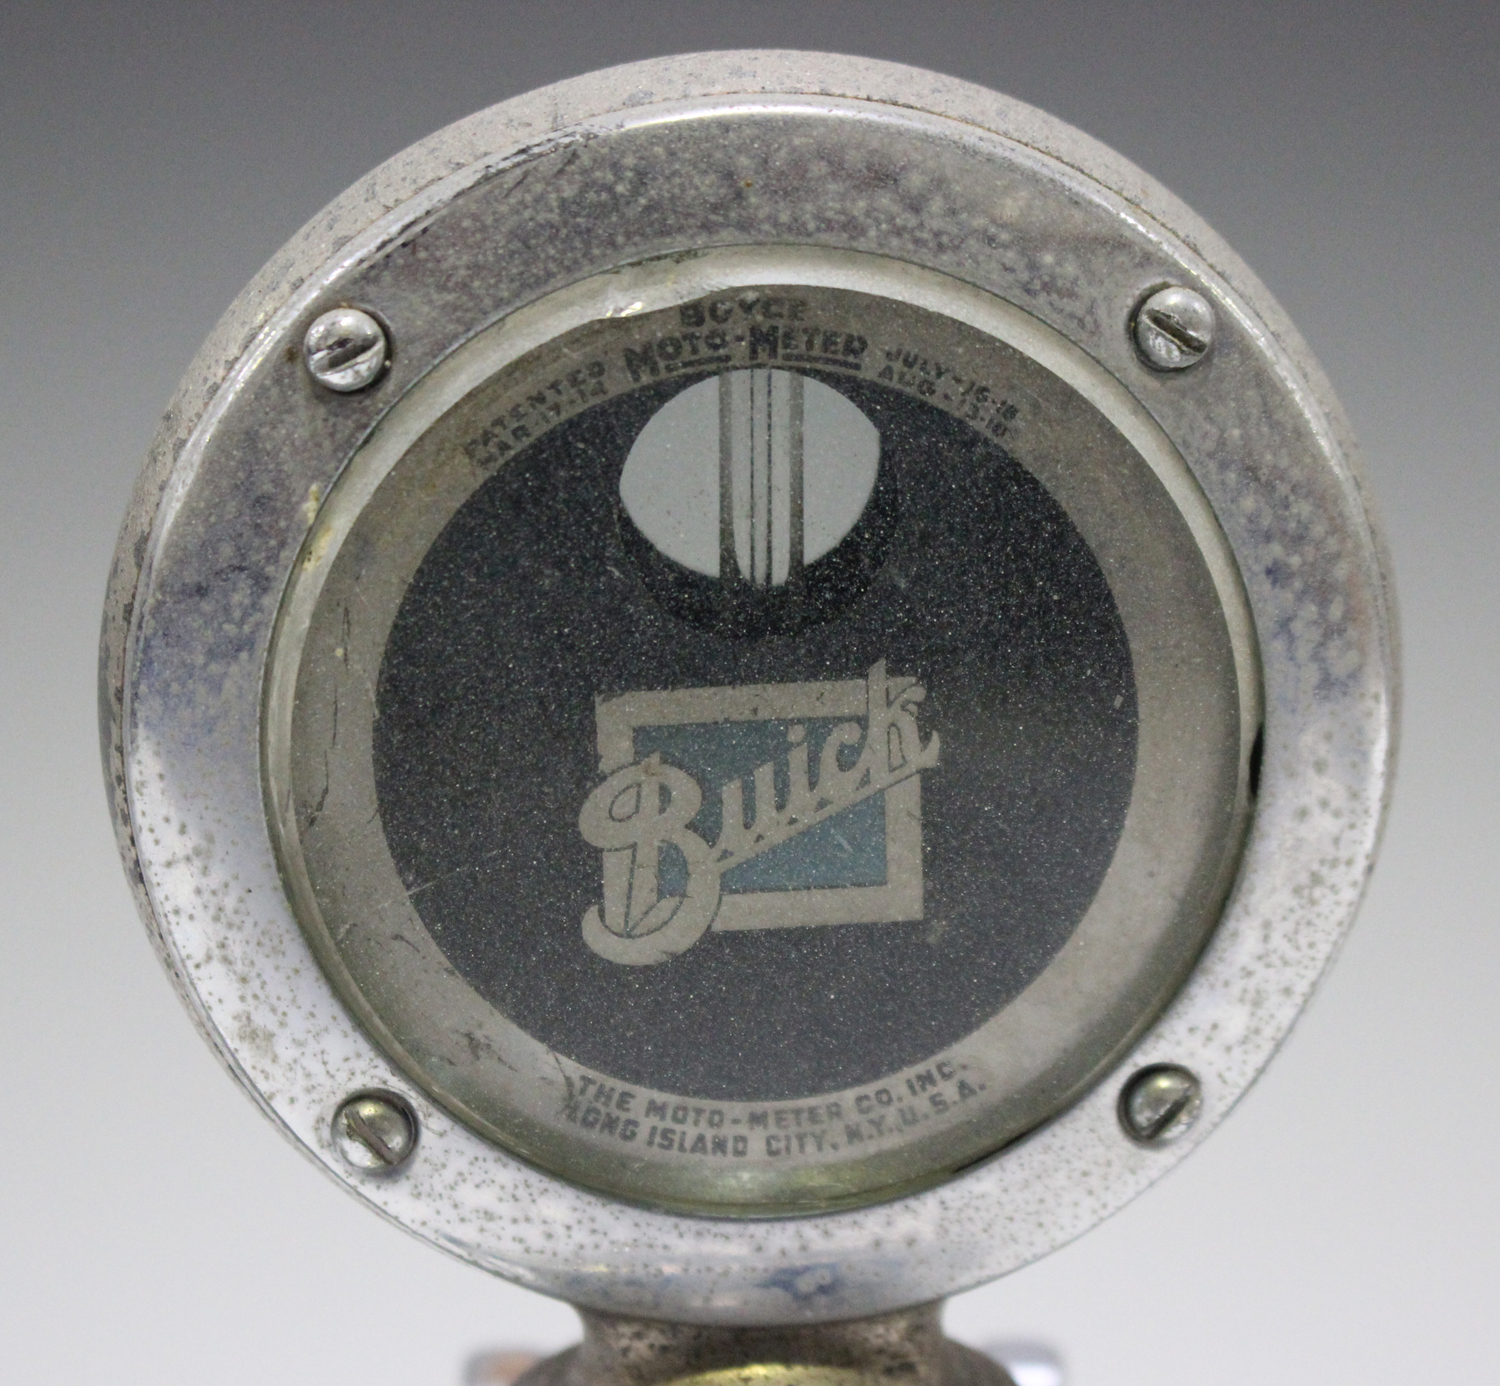 A Boyce Moto-Meter for a Buick motor car, with chromium plated finish and quick release cap, flanked - Image 6 of 6